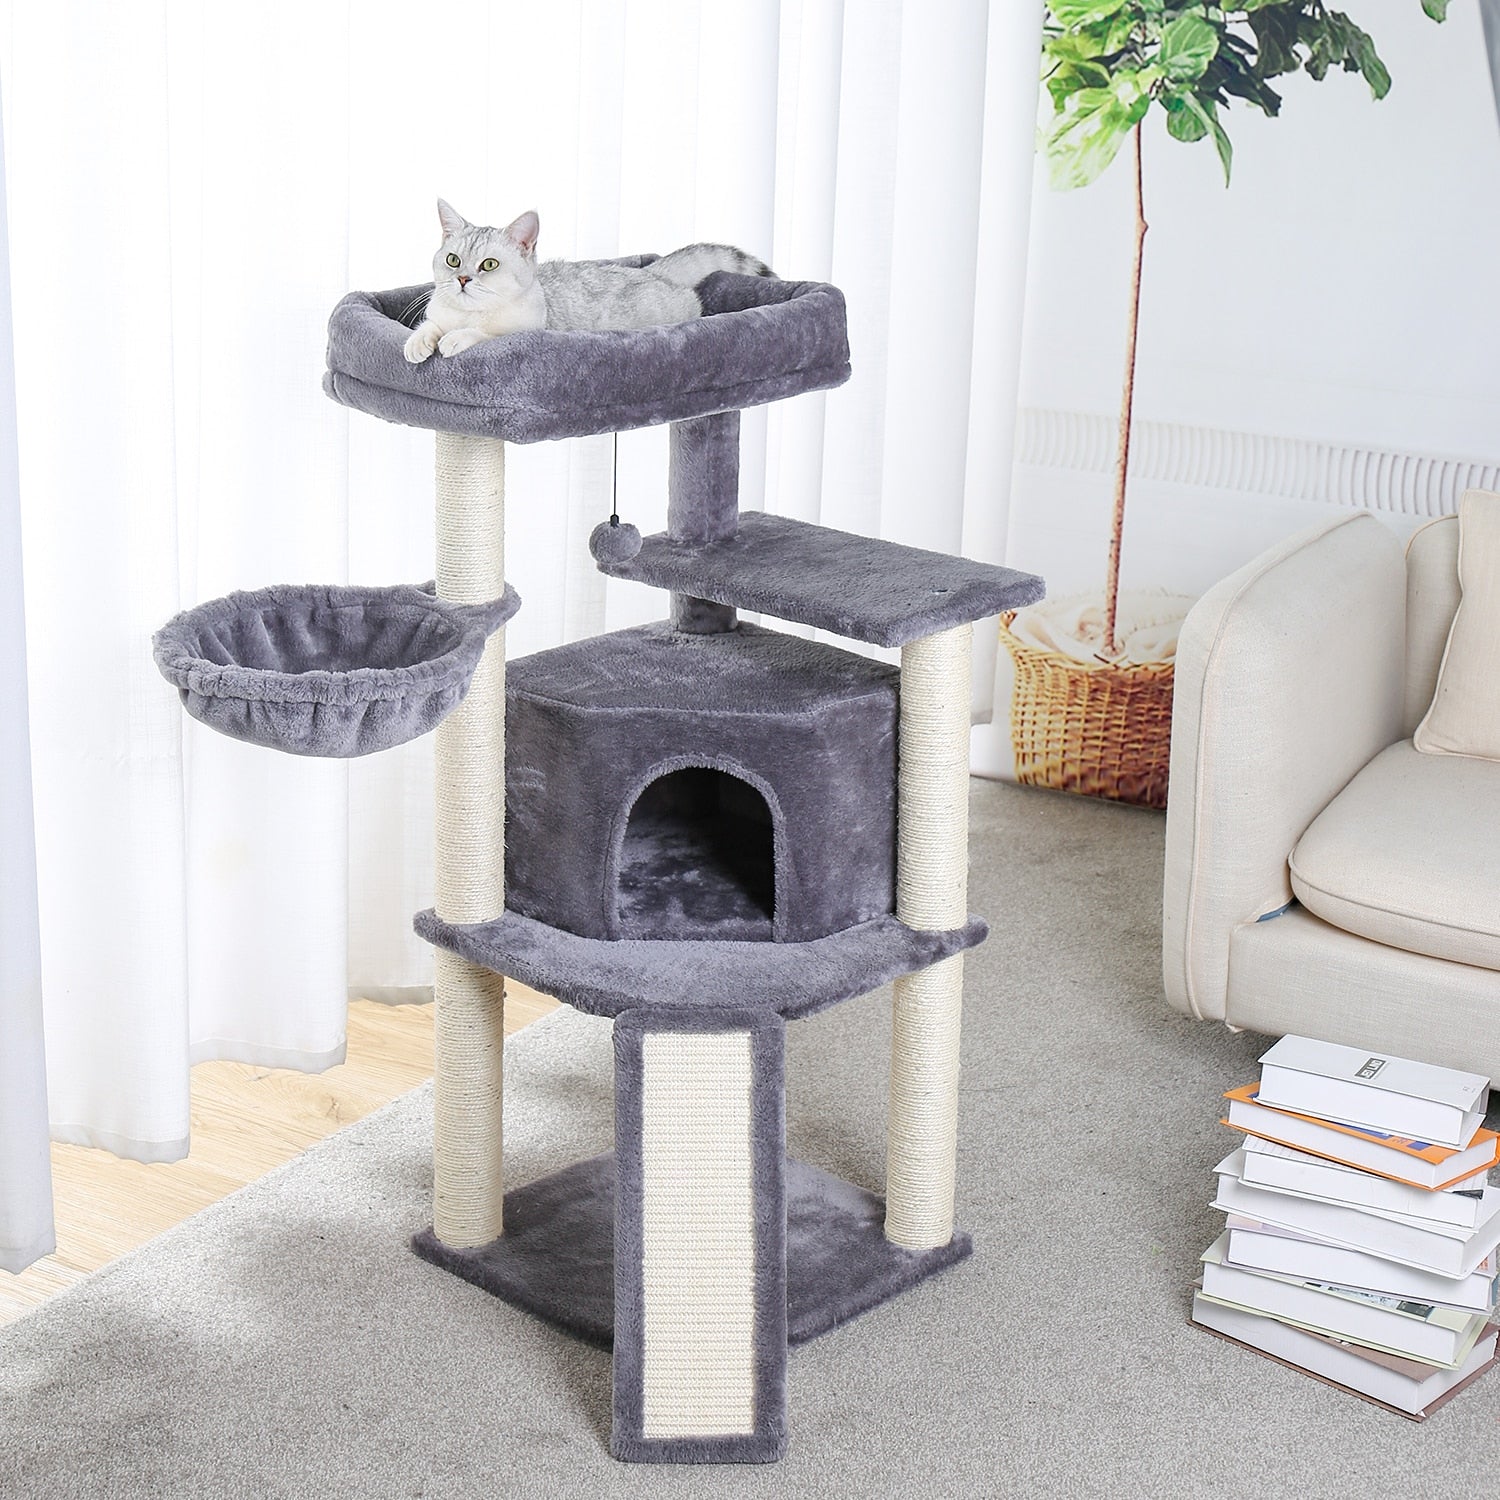 Multi-Level Pet Cat Tree House Candos Soft Natural Sisal Scratching Posts for Kitten Tower with Basket Beds Protecting Furniture